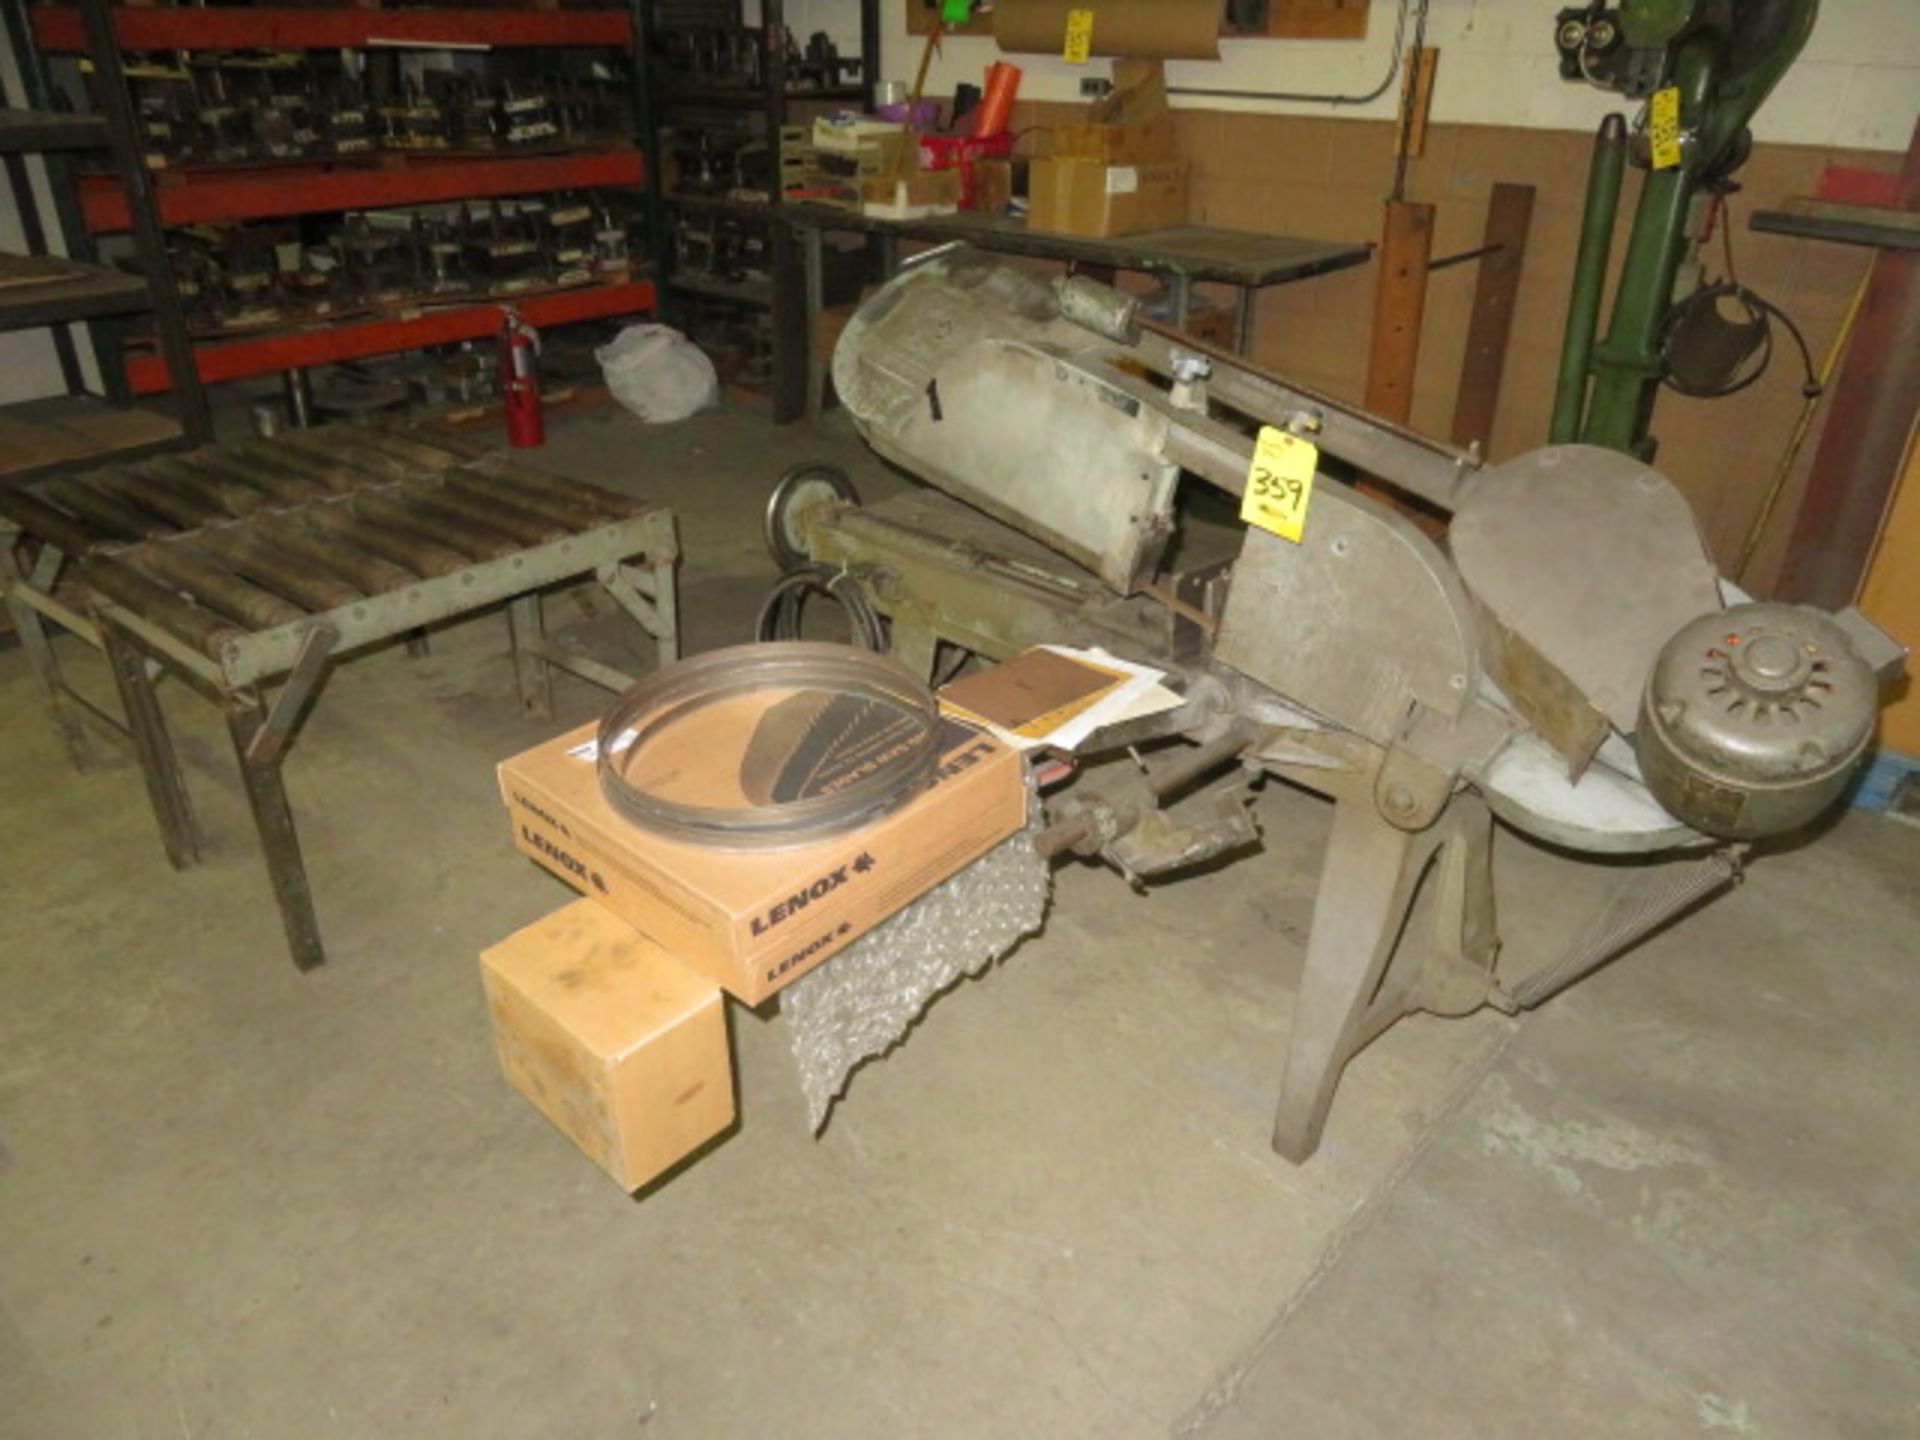 WELLS 8-M-43 HORIZONTAL METAL BAND SAW, S/N 5844, 8" X 16" WITH (2) NEW BLADES